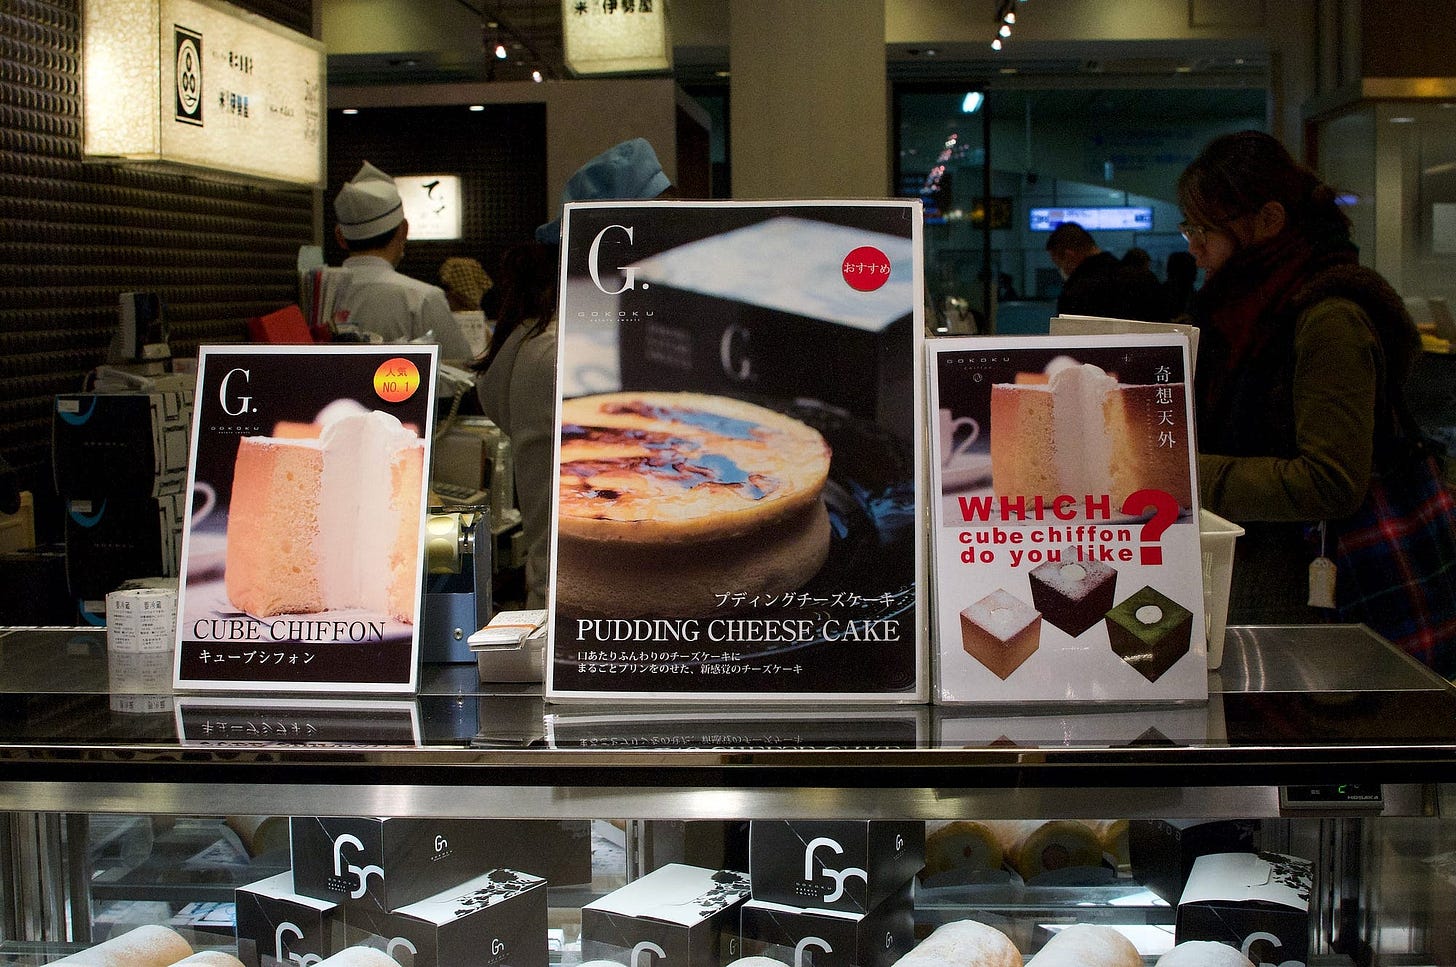 Food signs of Pudding Cheese Cake and Cube Chiffon Cake, photo by Juan Aguilera.